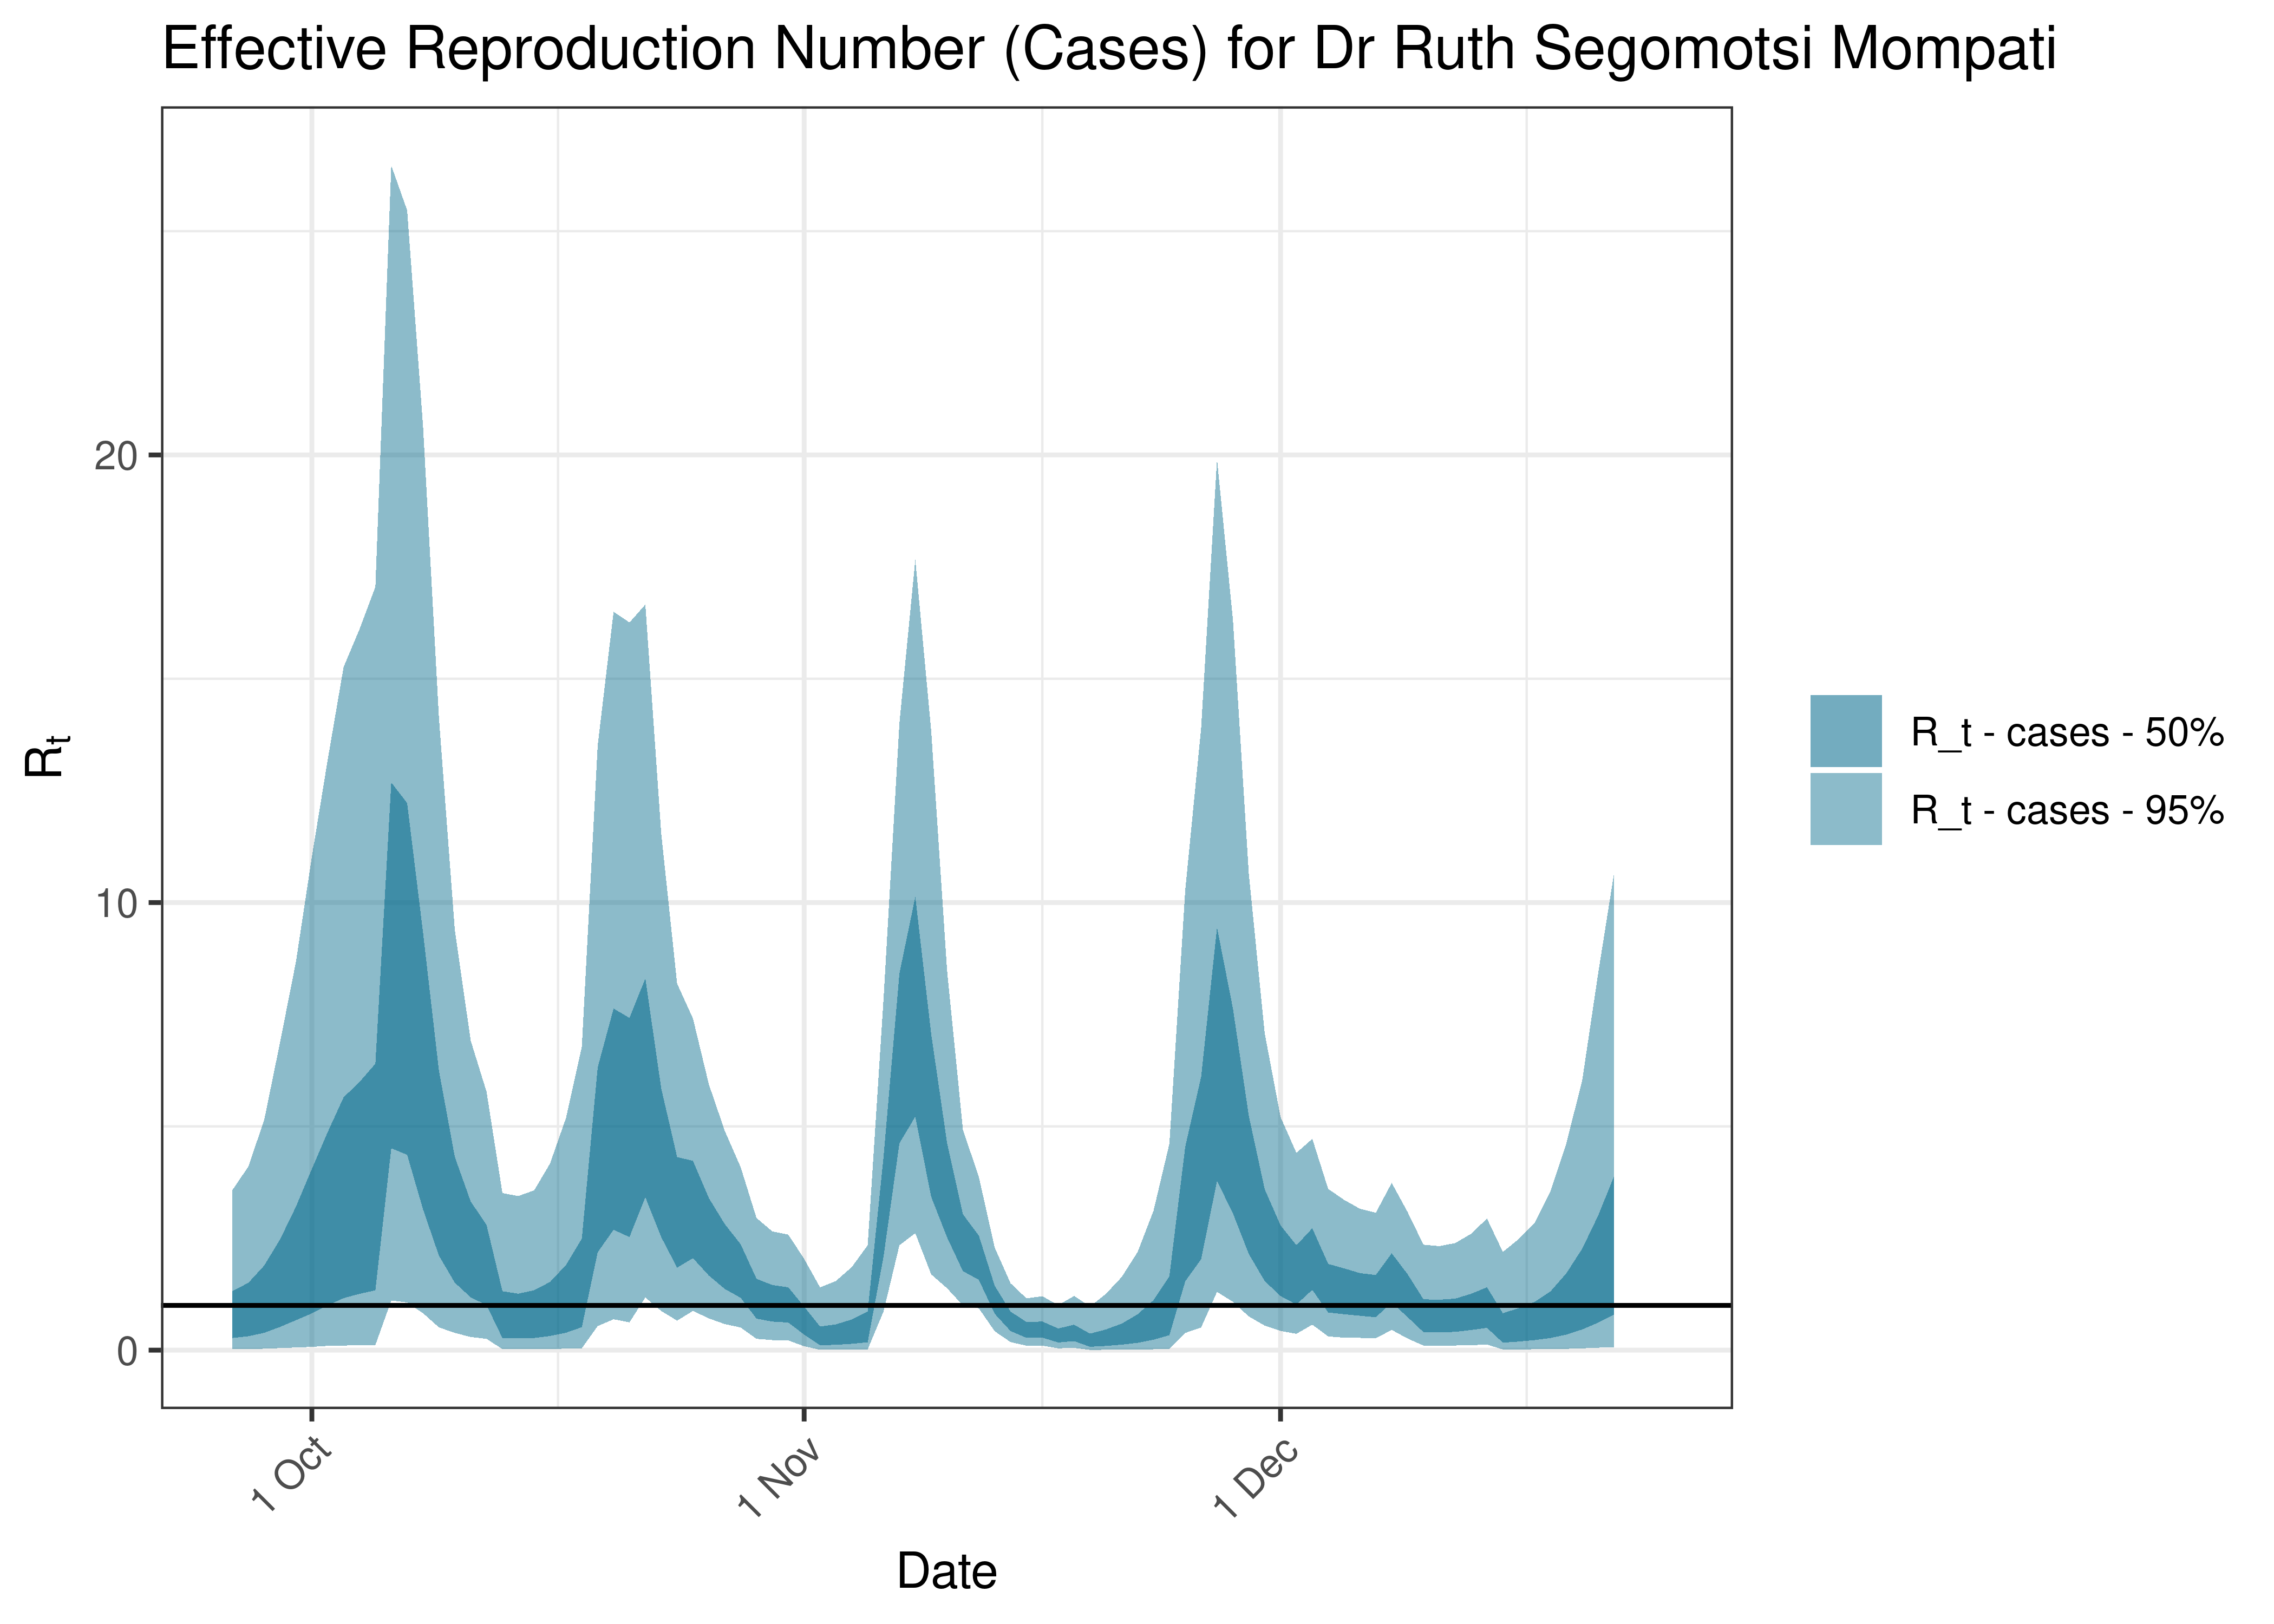 Estimated Effective Reproduction Number Based on Cases for Dr Ruth Segomotsi Mompati over last 90 days